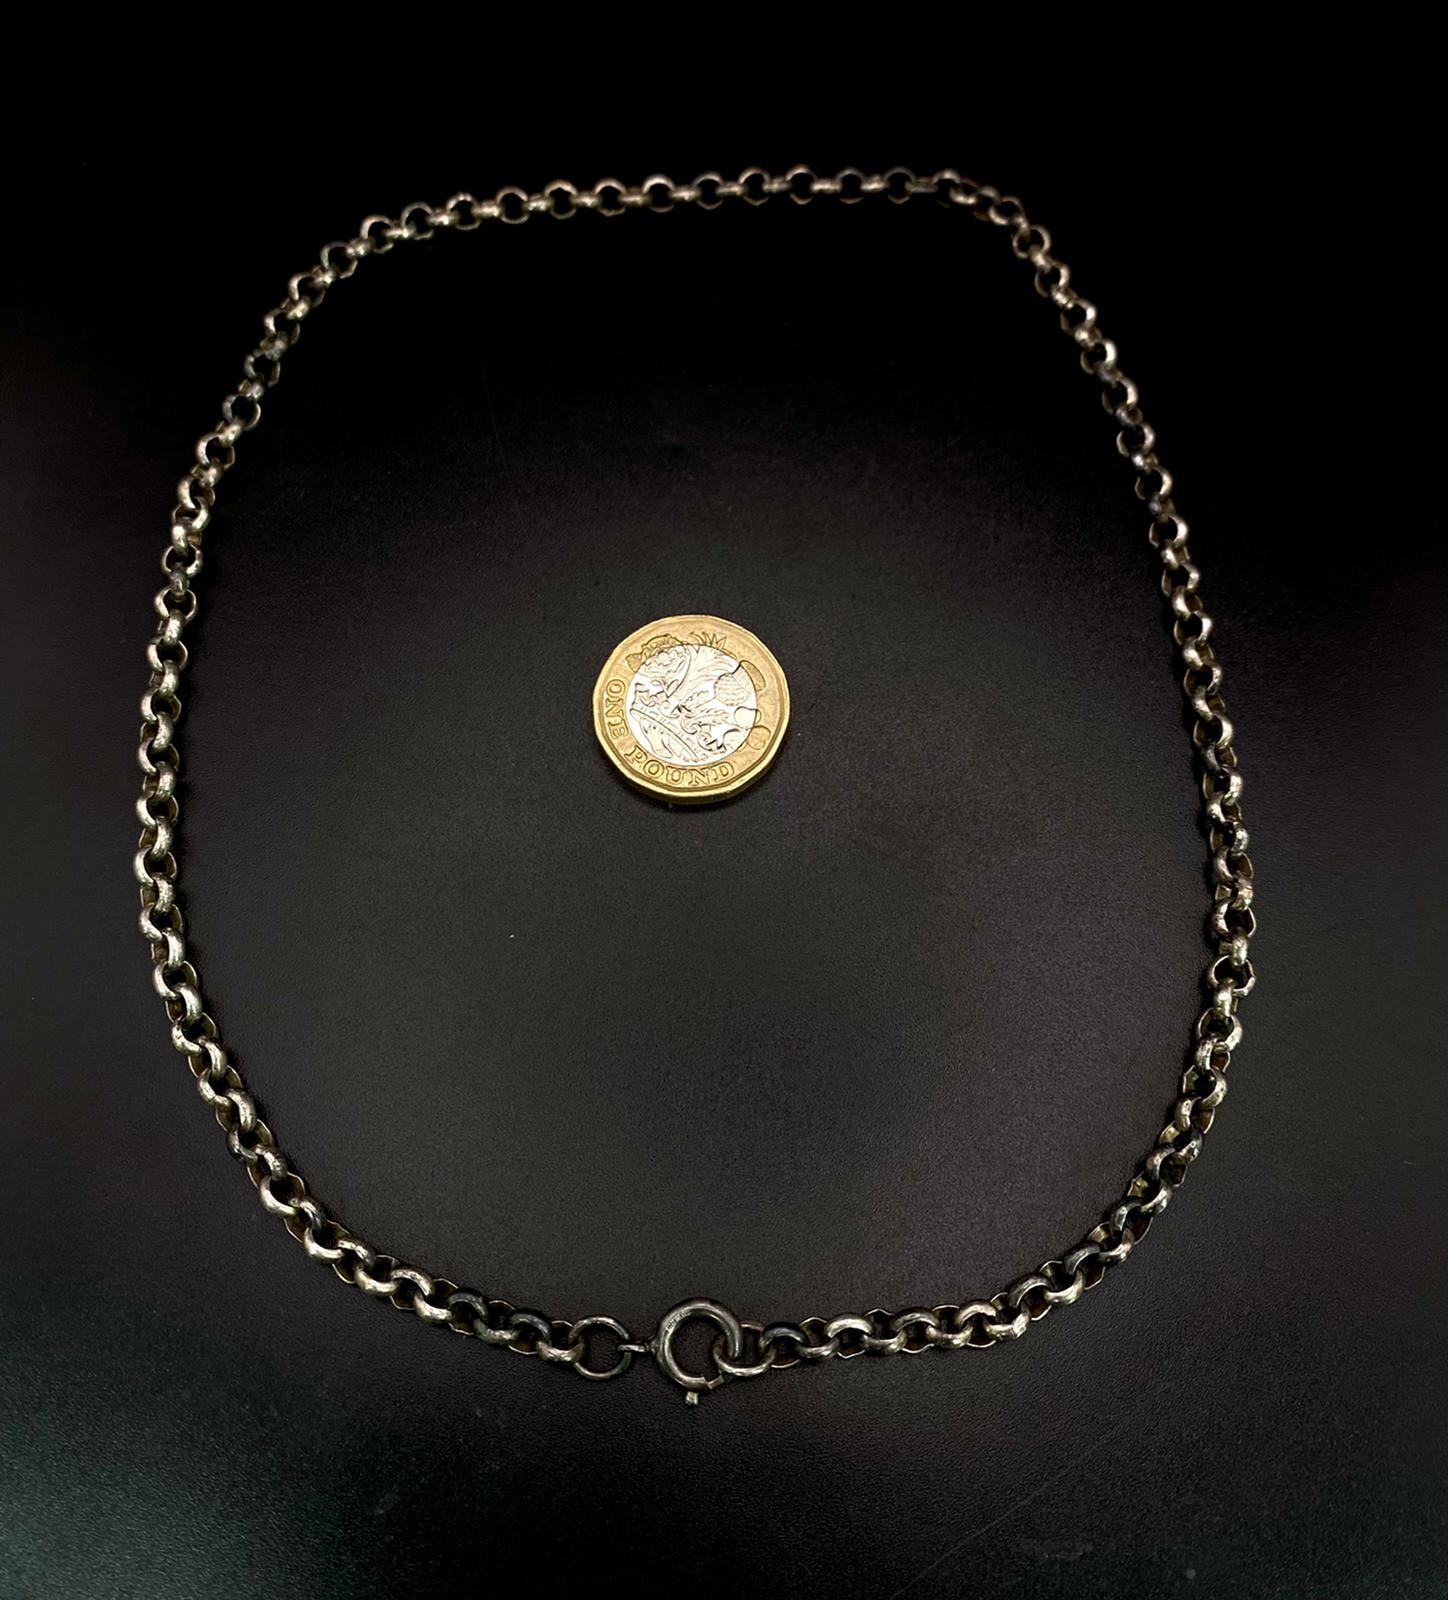 Vintage Sterling Silver Circle Link Necklace. 44cm length, 22.3g total weight. - Image 3 of 4